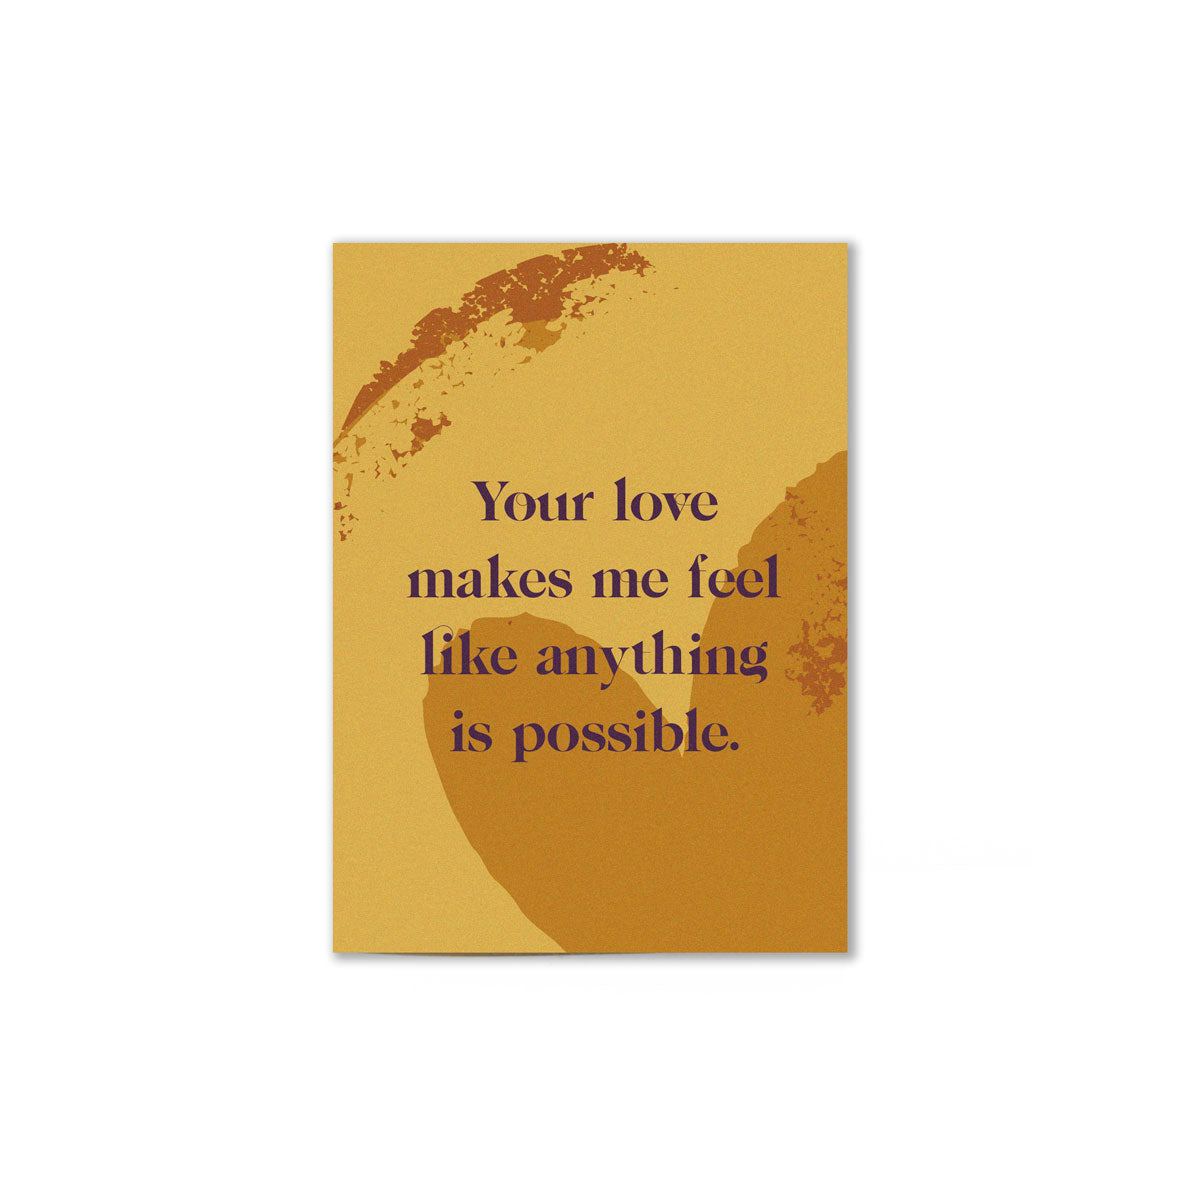 yellow love affirmation card that reads "your love makes me feel like anything is possible." with a heart illustration on the cover